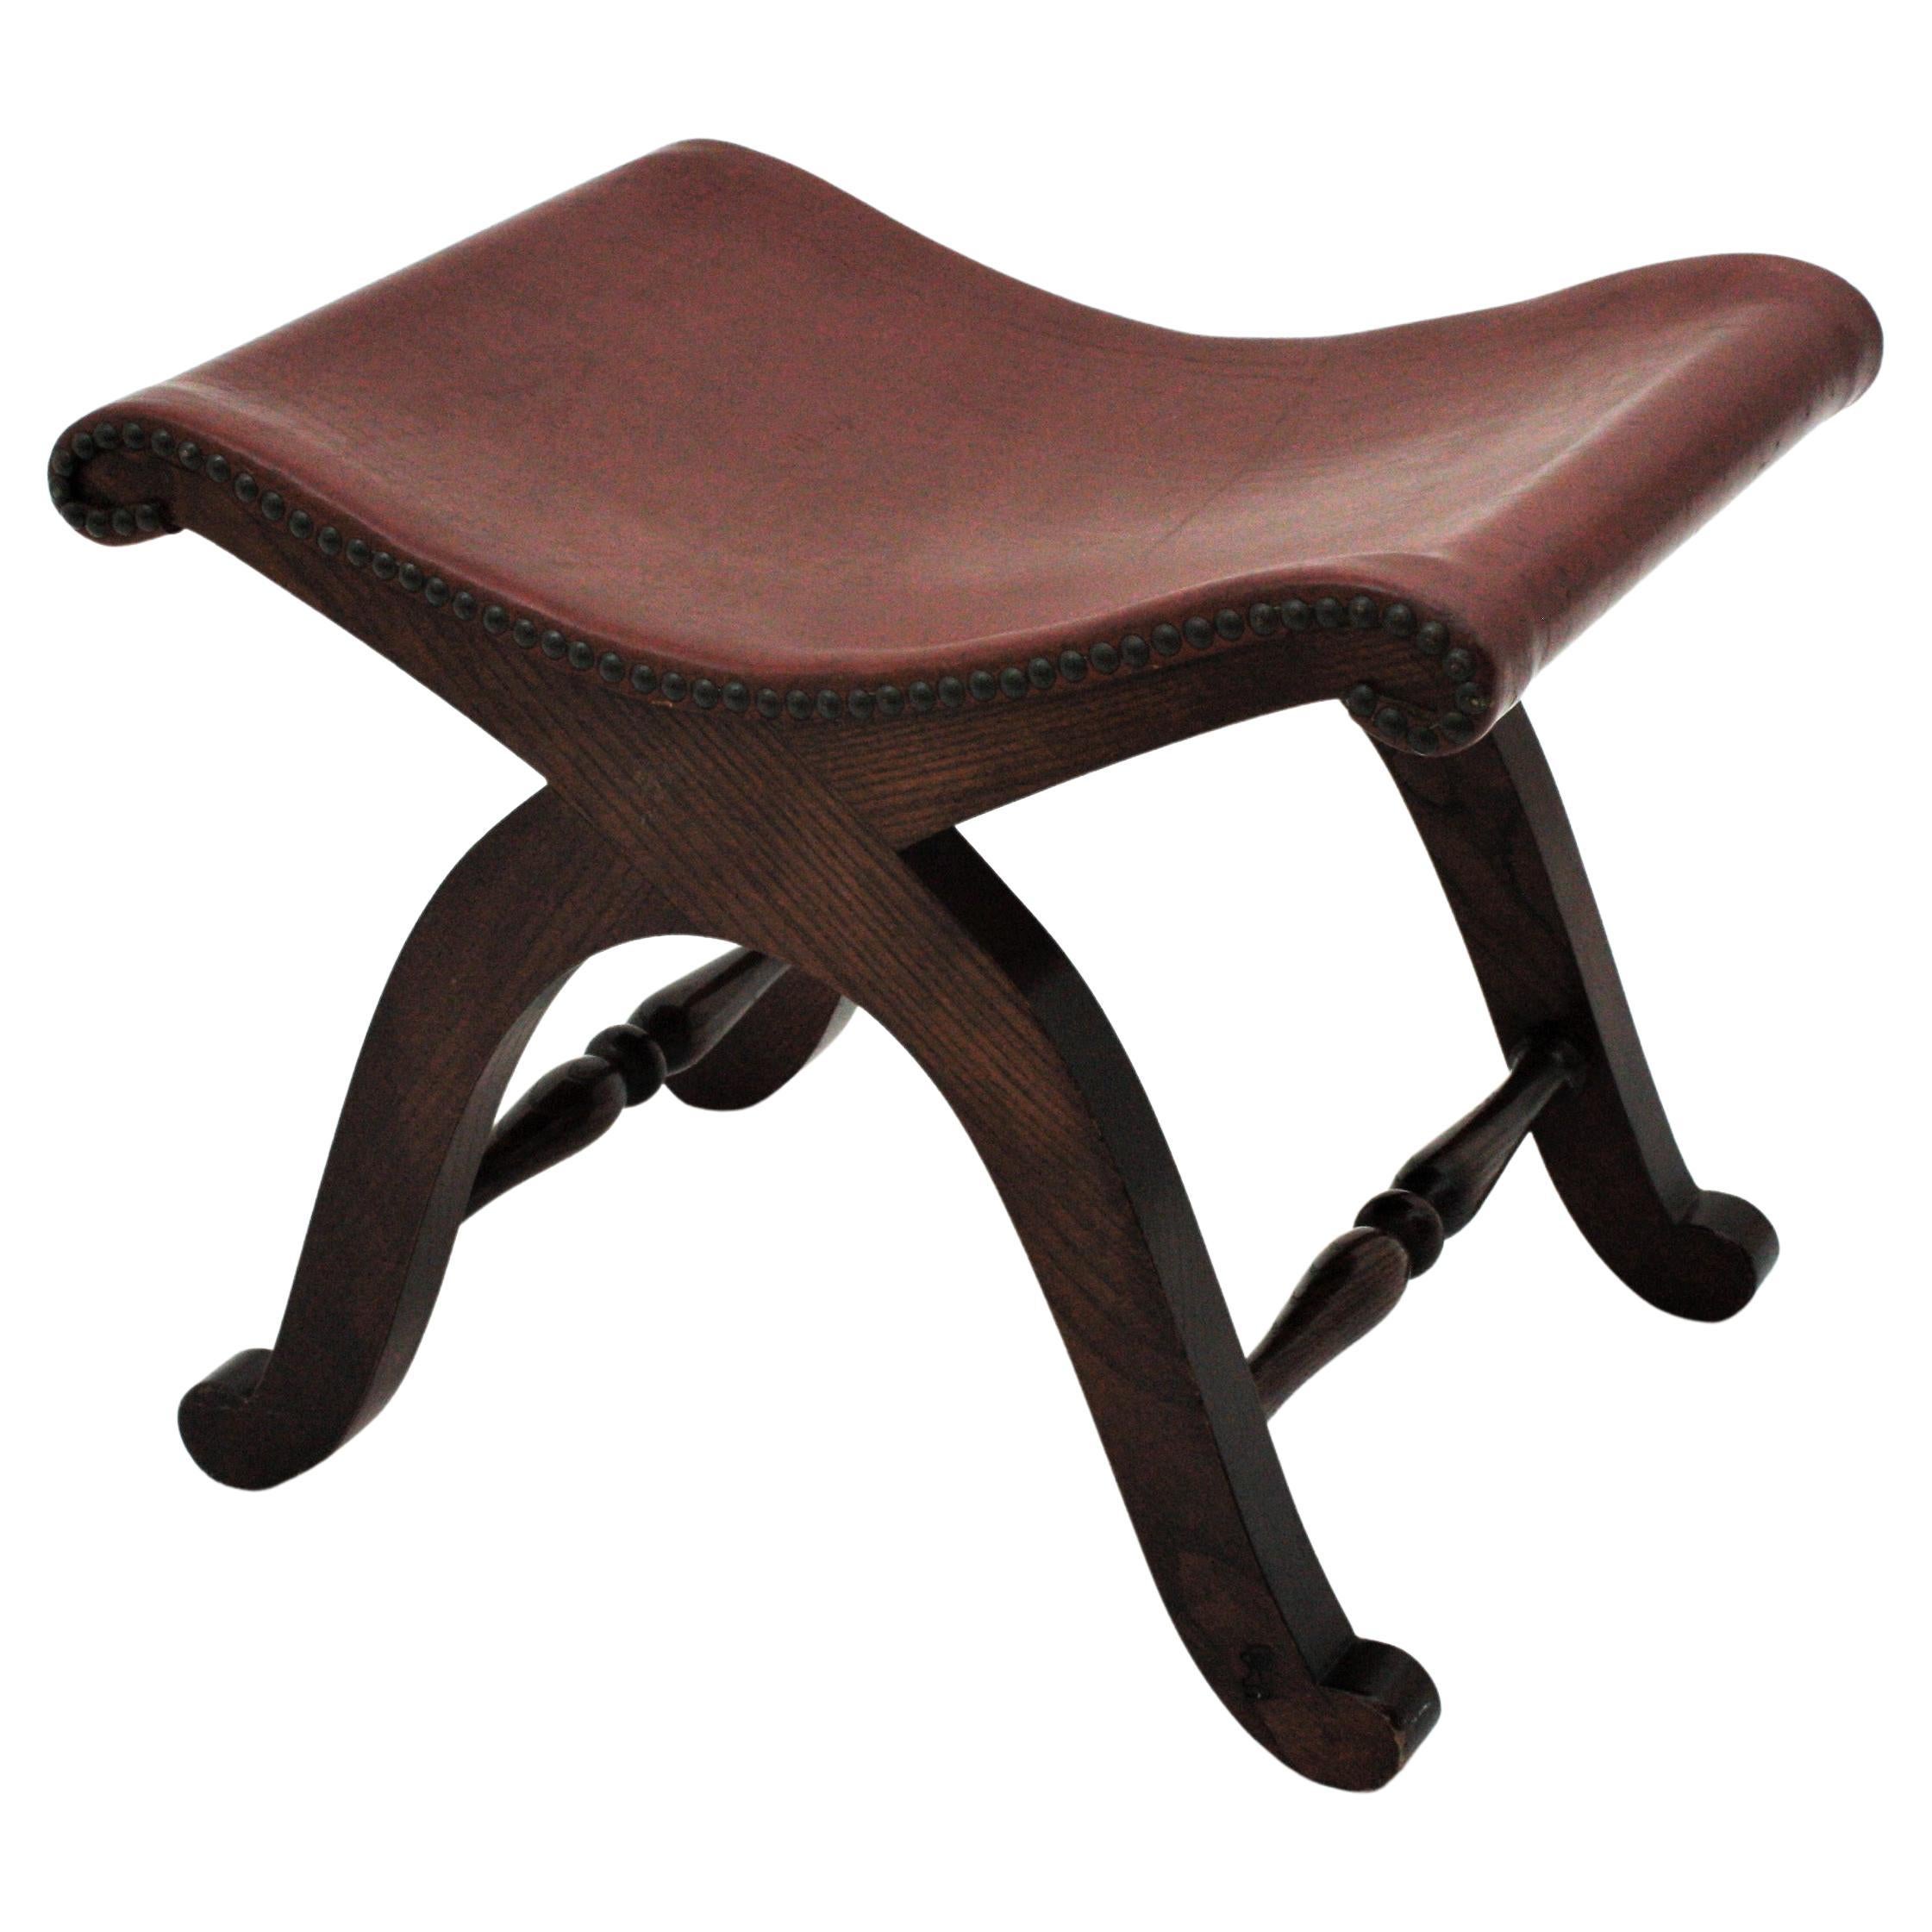 Elegant stool with wooden curule base and cognac leather seat. Designed by Pierre Lottier and manufactured by Valentí, Spain, 1940s.
This stool or ottoman is strong and sturdy and it is very good condition. The original leather seat is accented by